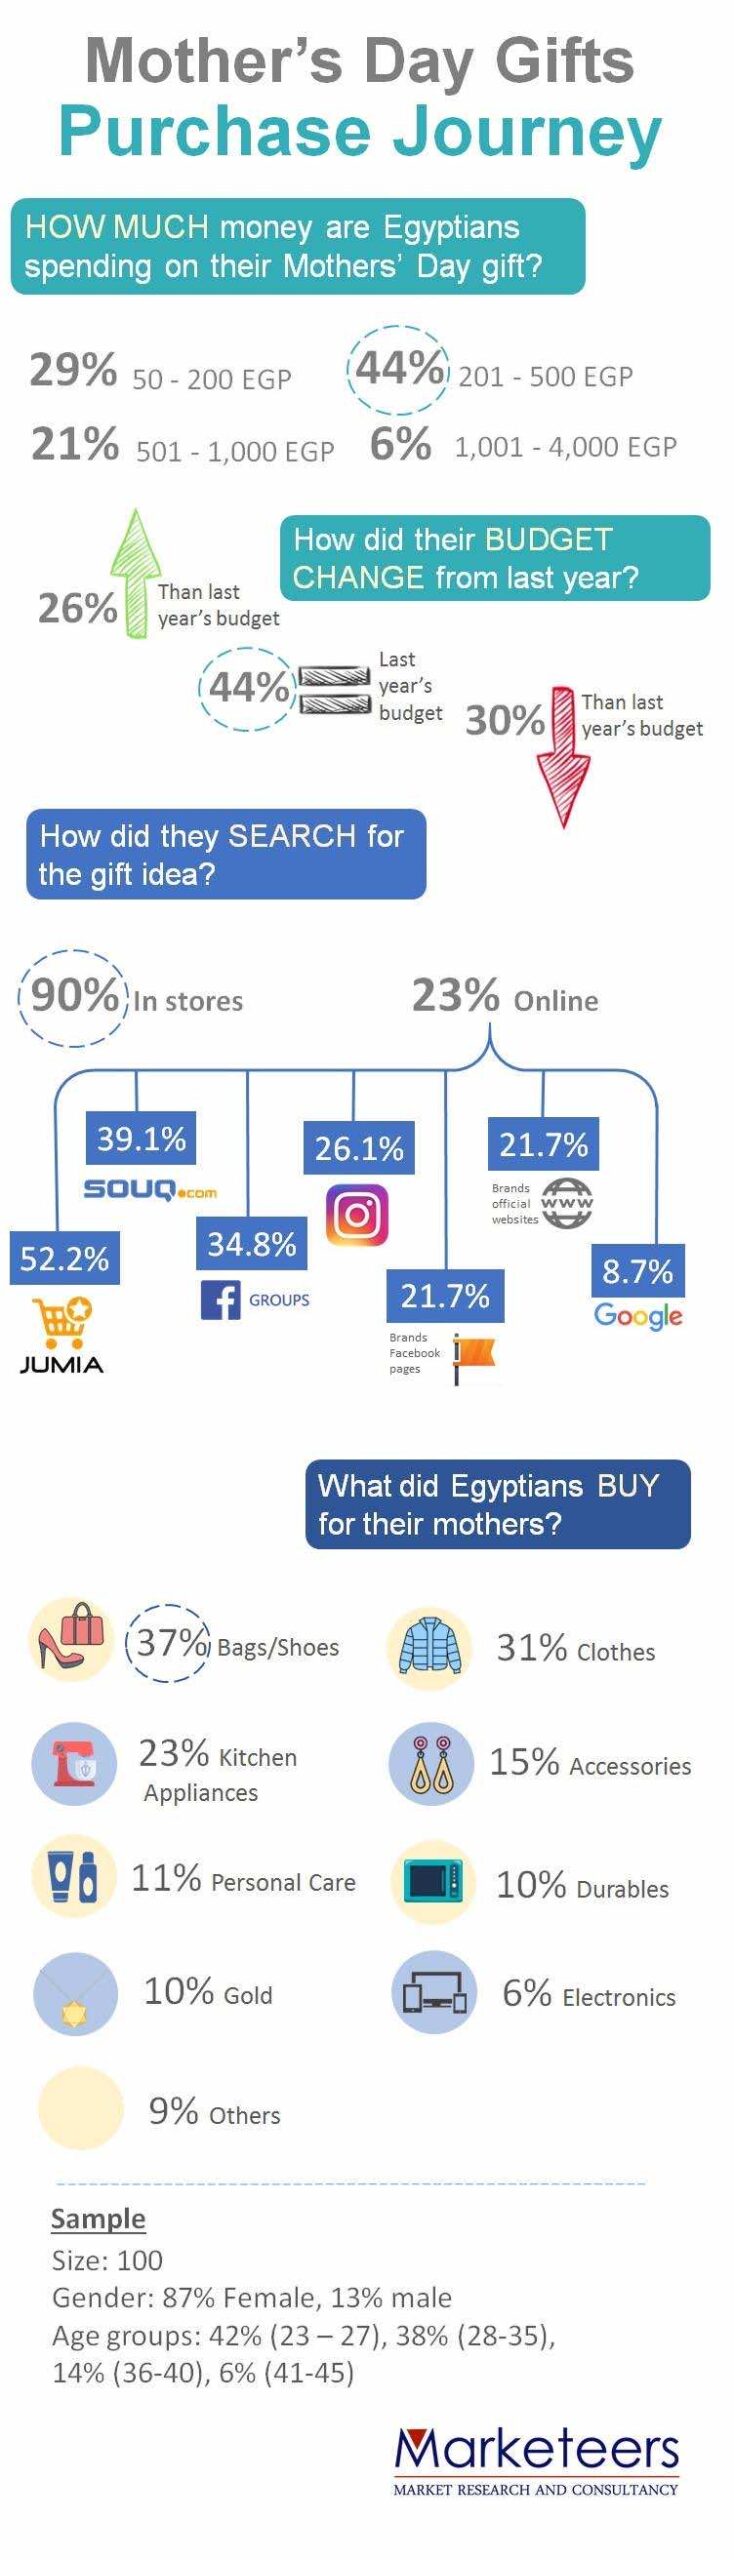 Mother's day gifts purchase infographic in Egypt after the floatation